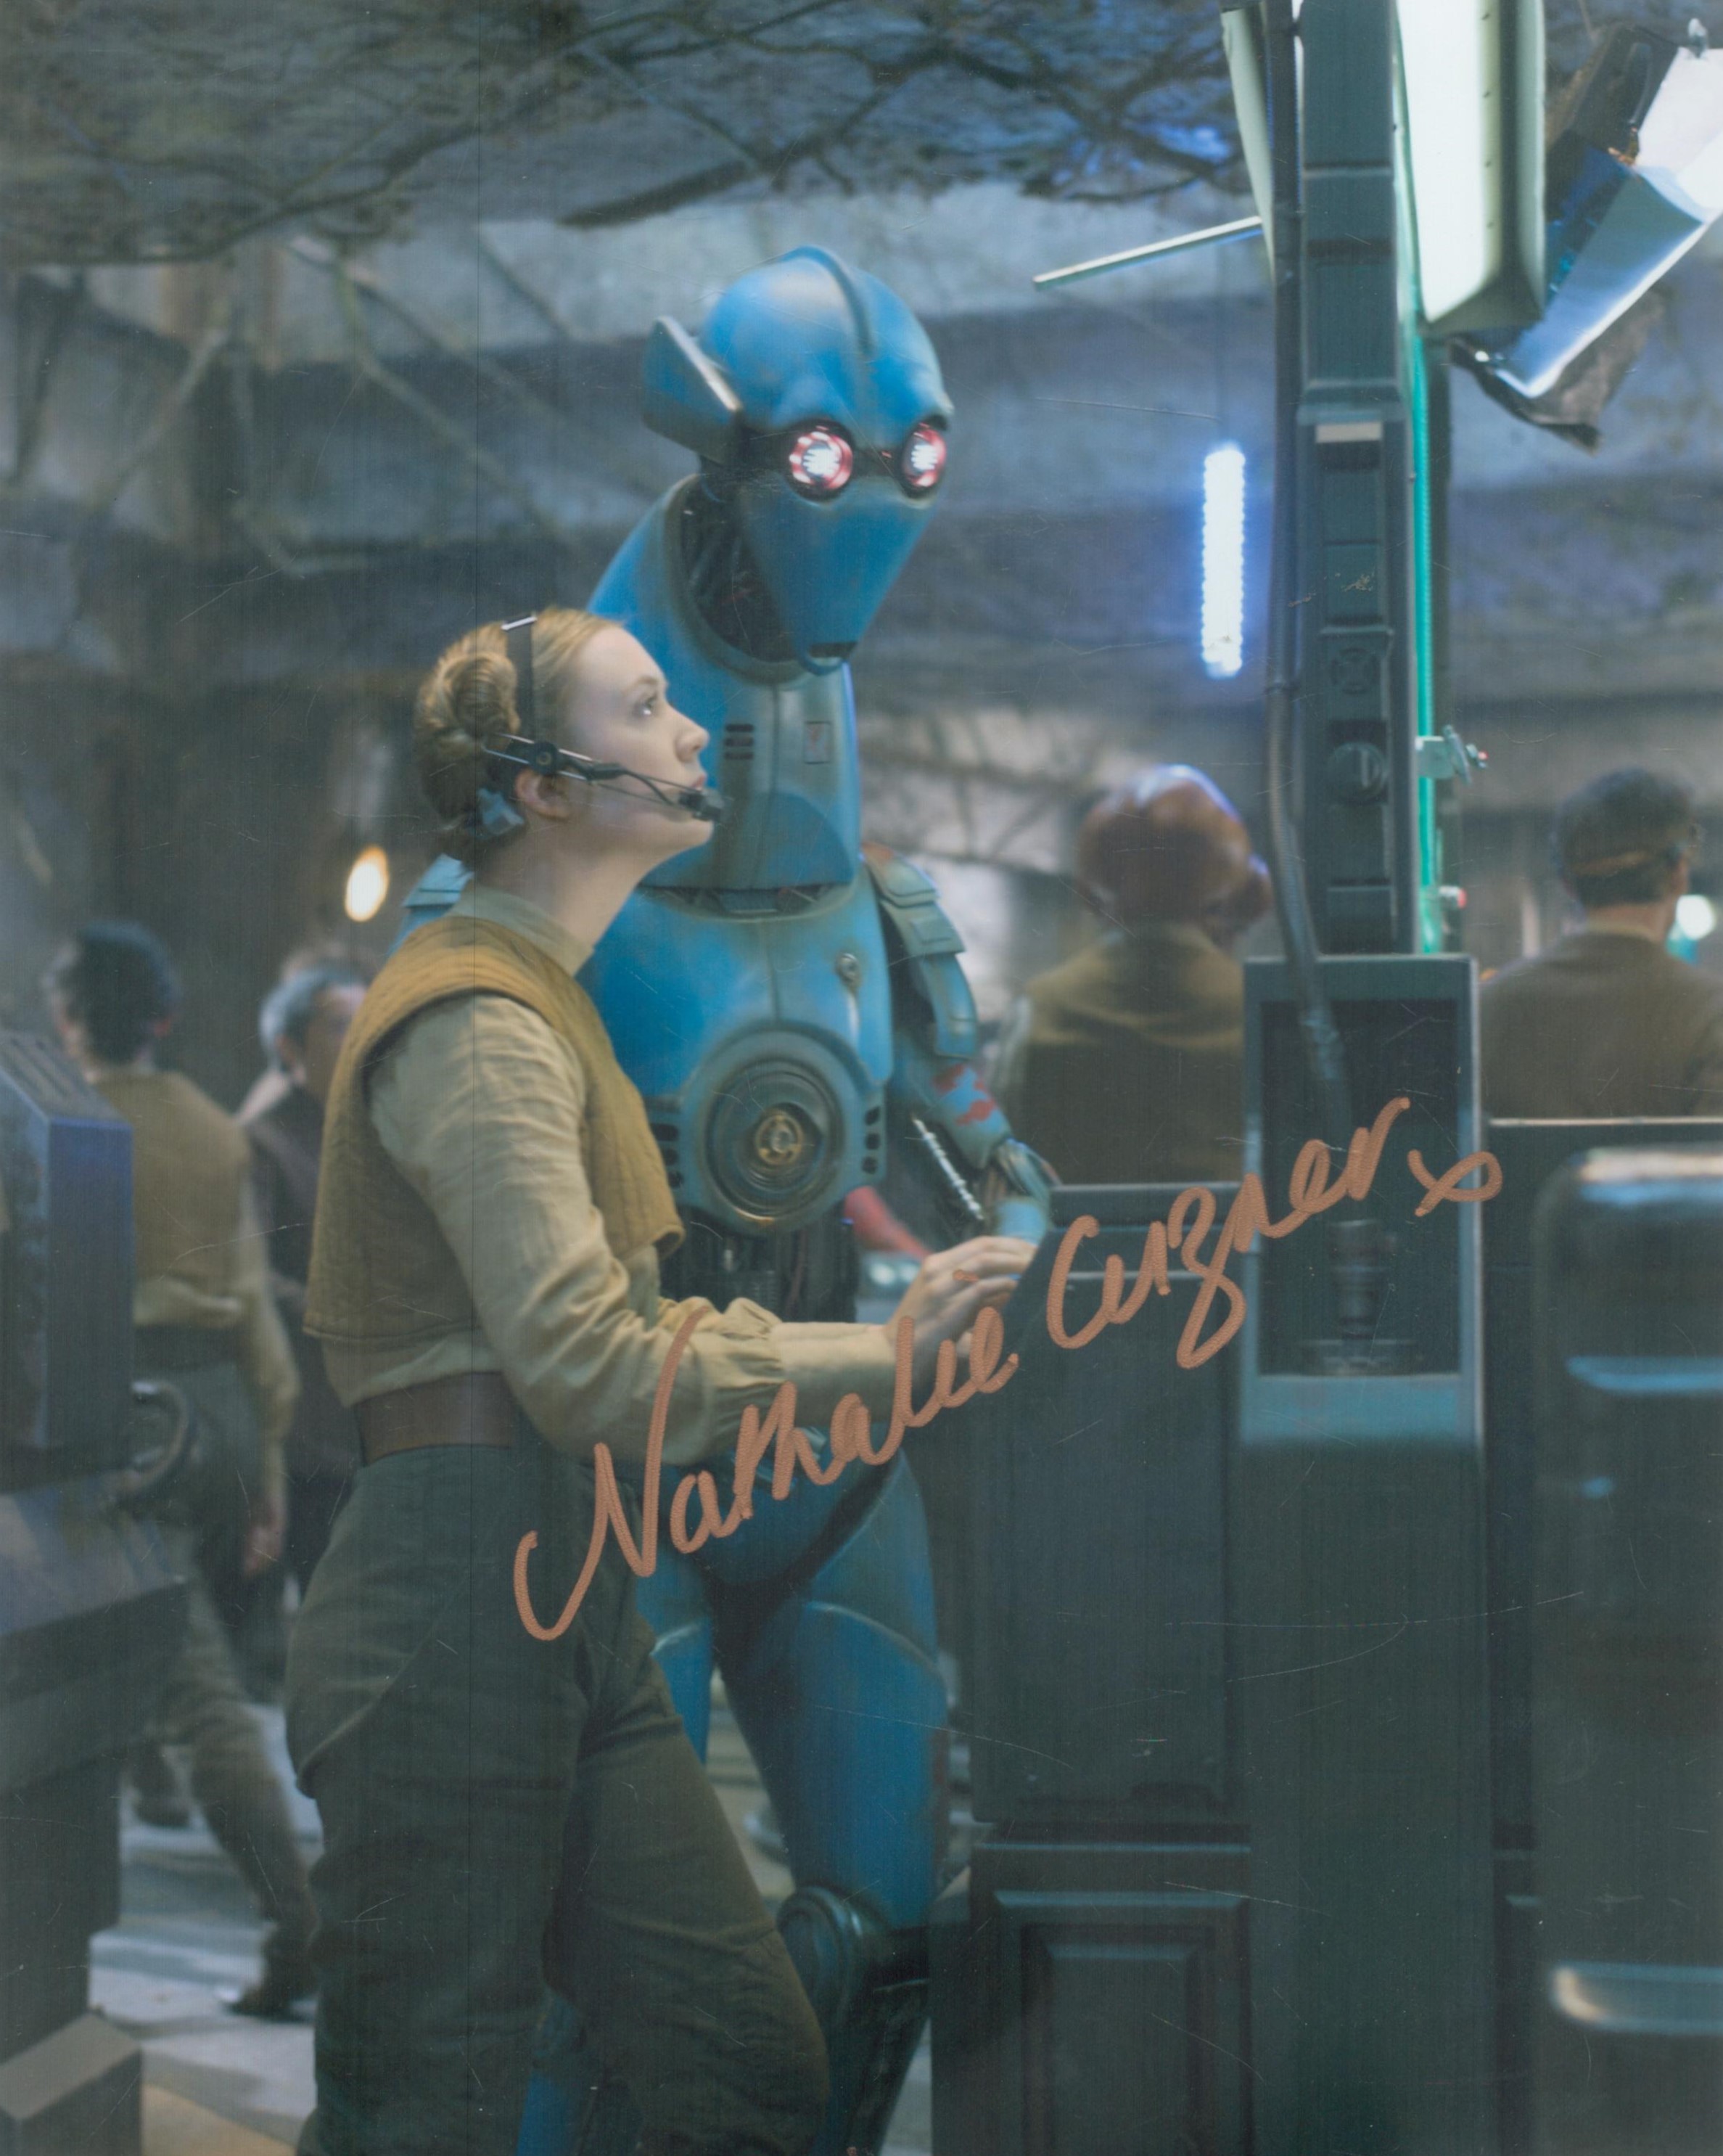 Star Wars Nathalie Cuzner as Droid PZ4CO signed 10 x 8 inch colour movie scene photo. Nathalie